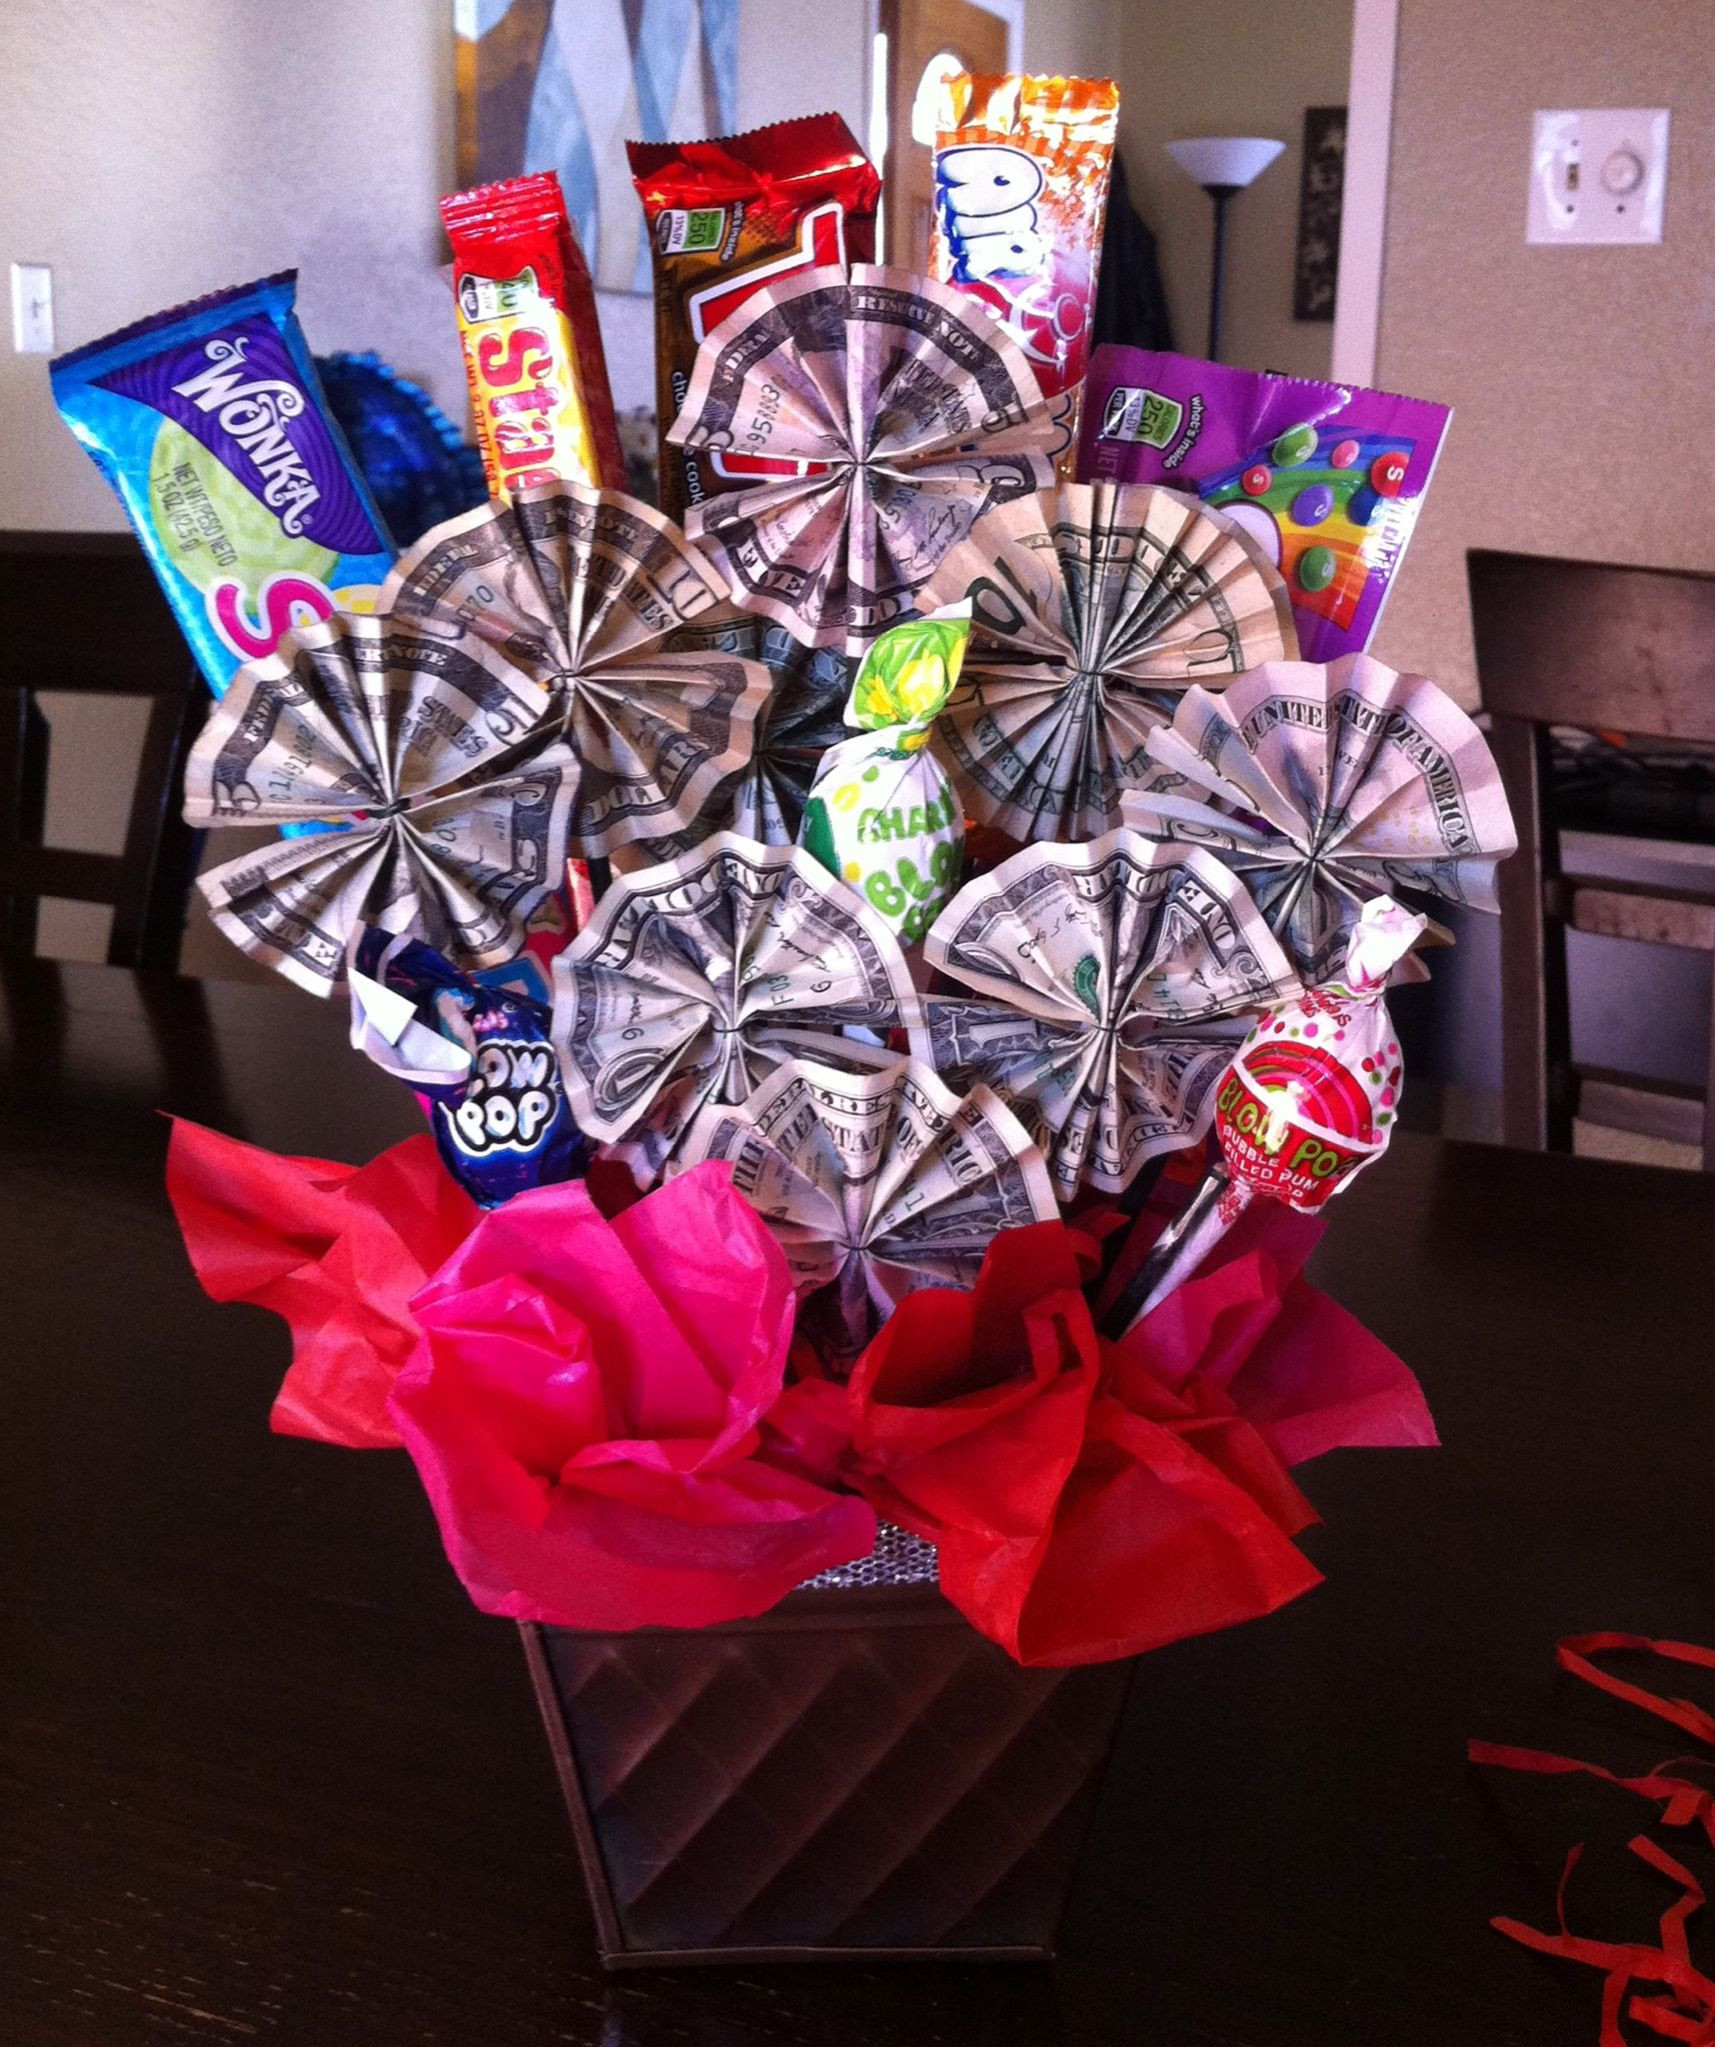 5Th Grade Graduation Gift Ideas
 Money candy bouquet I made this for my niece as a t